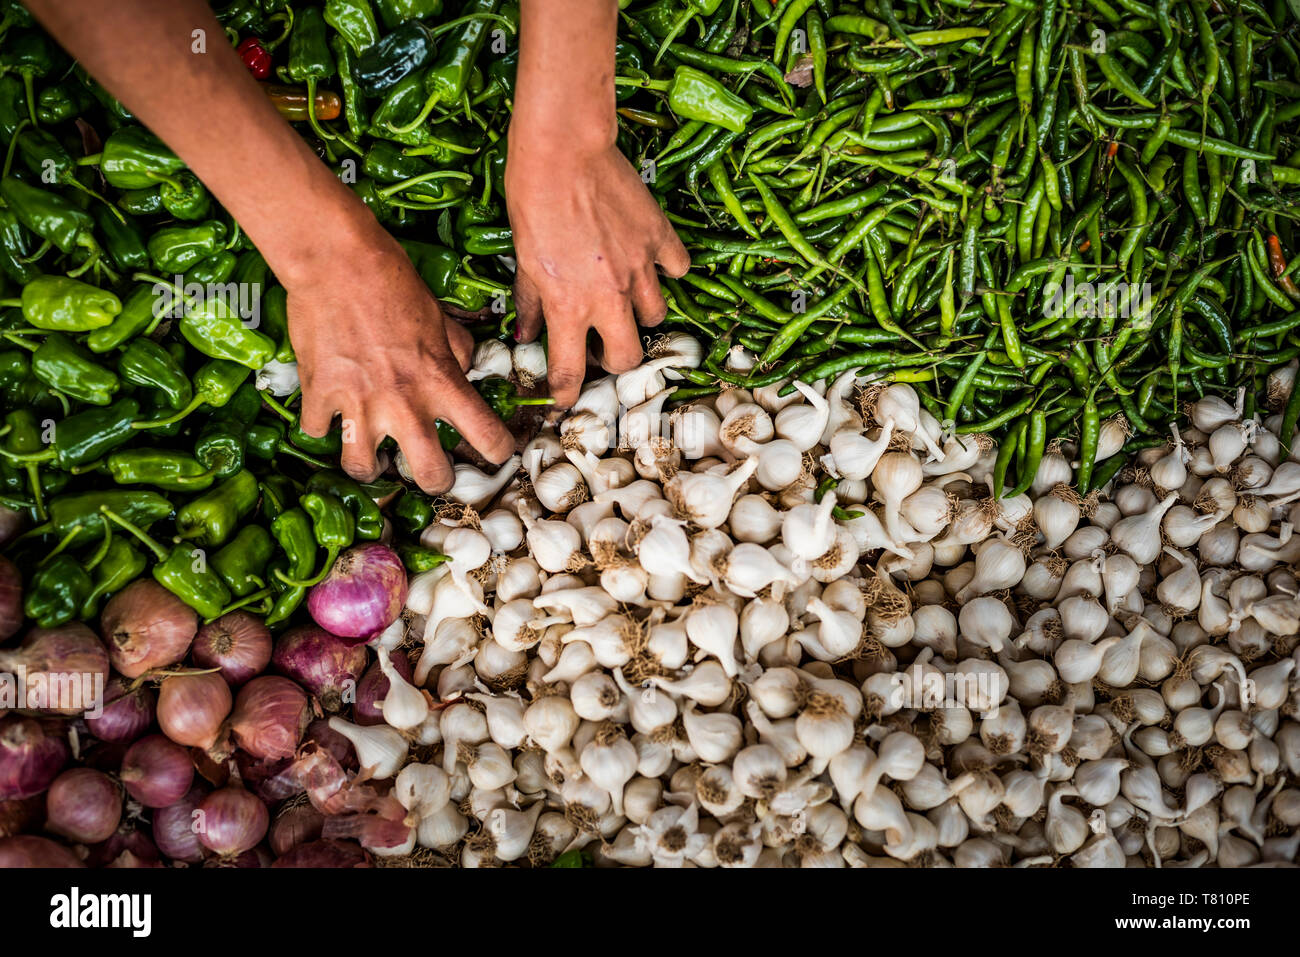 Fruit and vegetables for sale at Ywama Market, Inle Lake, Shan State, Myanmar (Burma), Asia Stock Photo